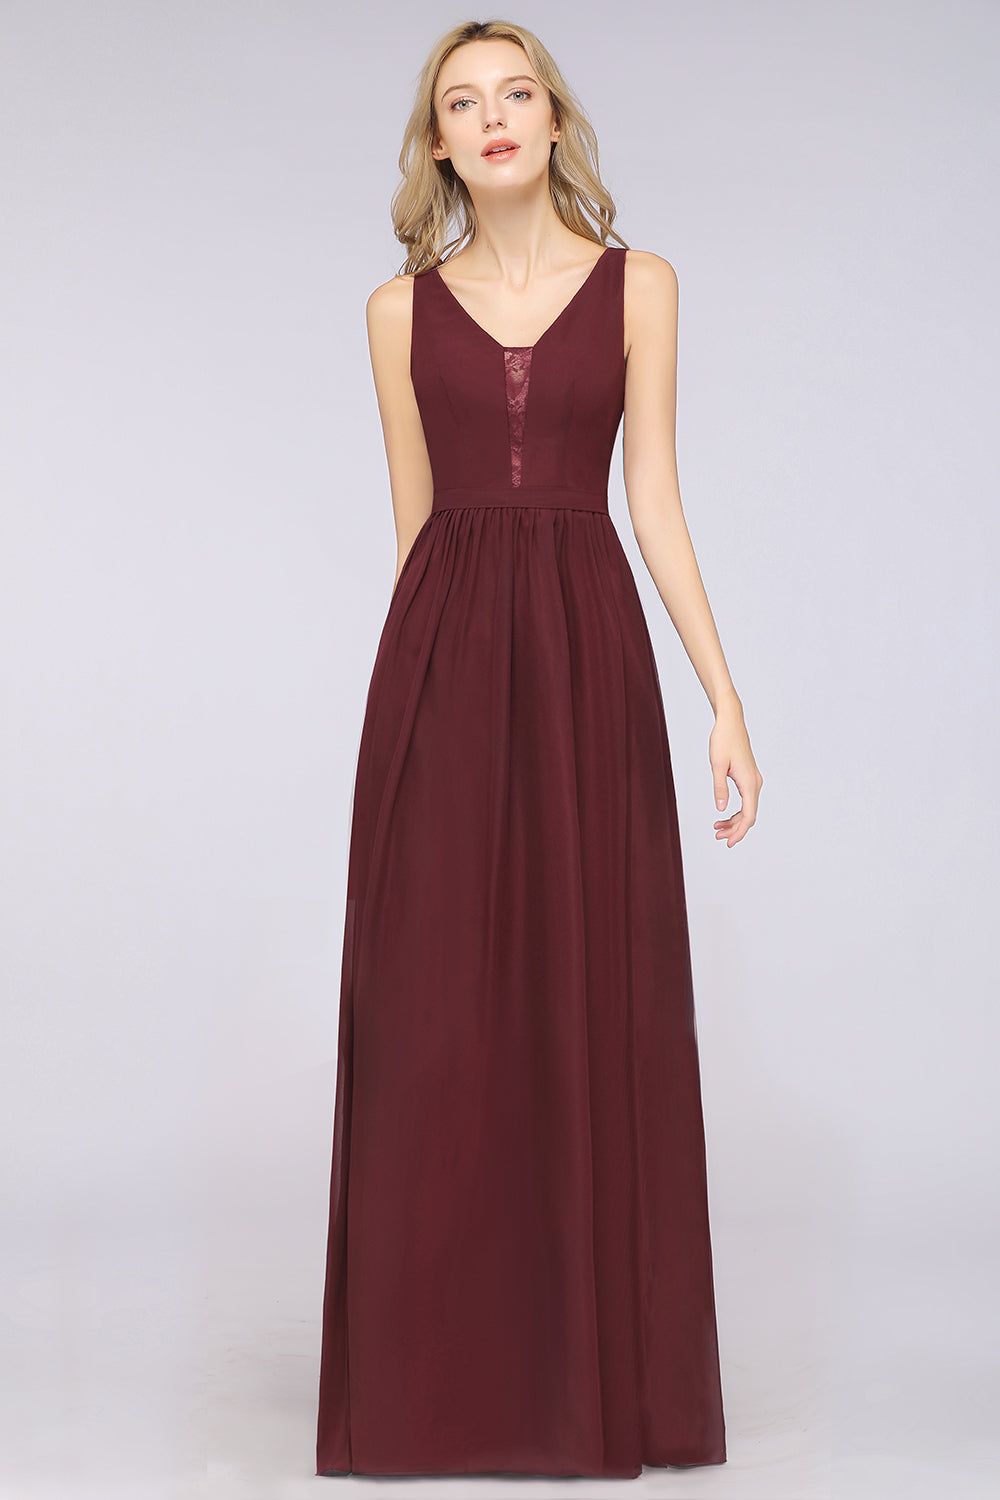 Load image into Gallery viewer, Gorgeous A-line V-neck Chiffon Long Bridsmaid Dress-BIZTUNNEL
